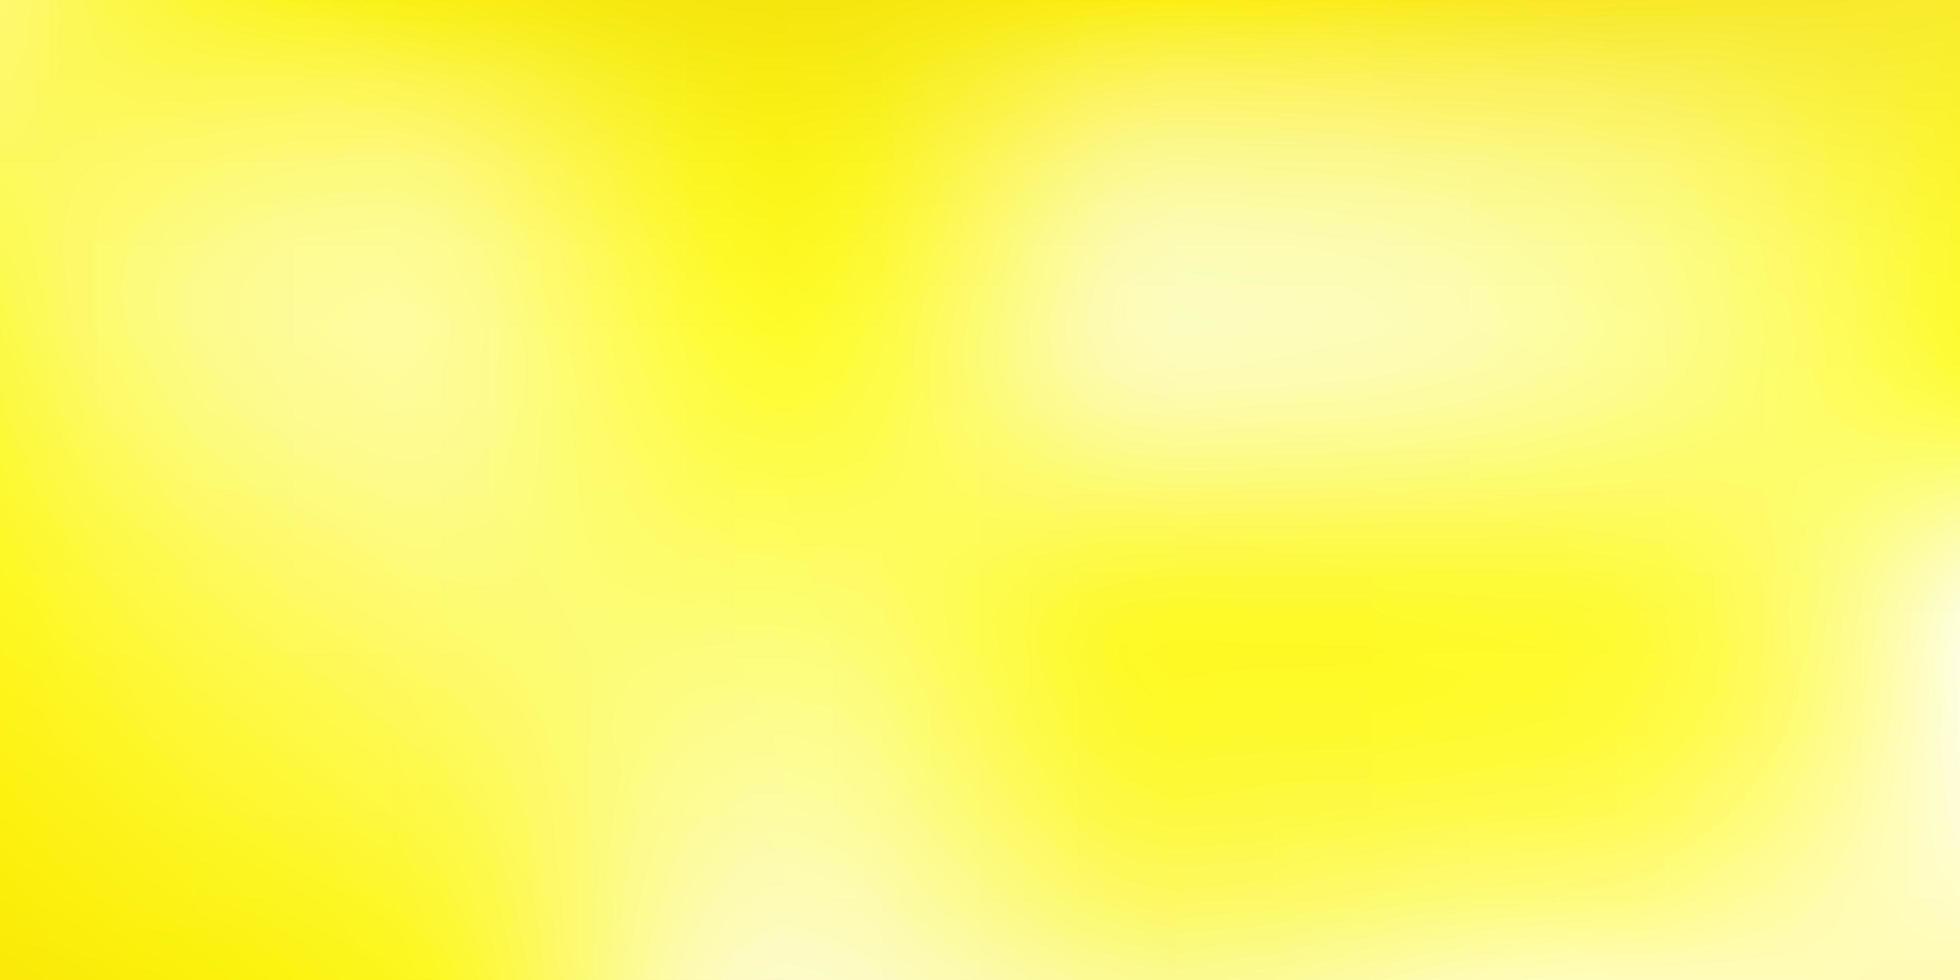 Light Yellow vector blurred layout